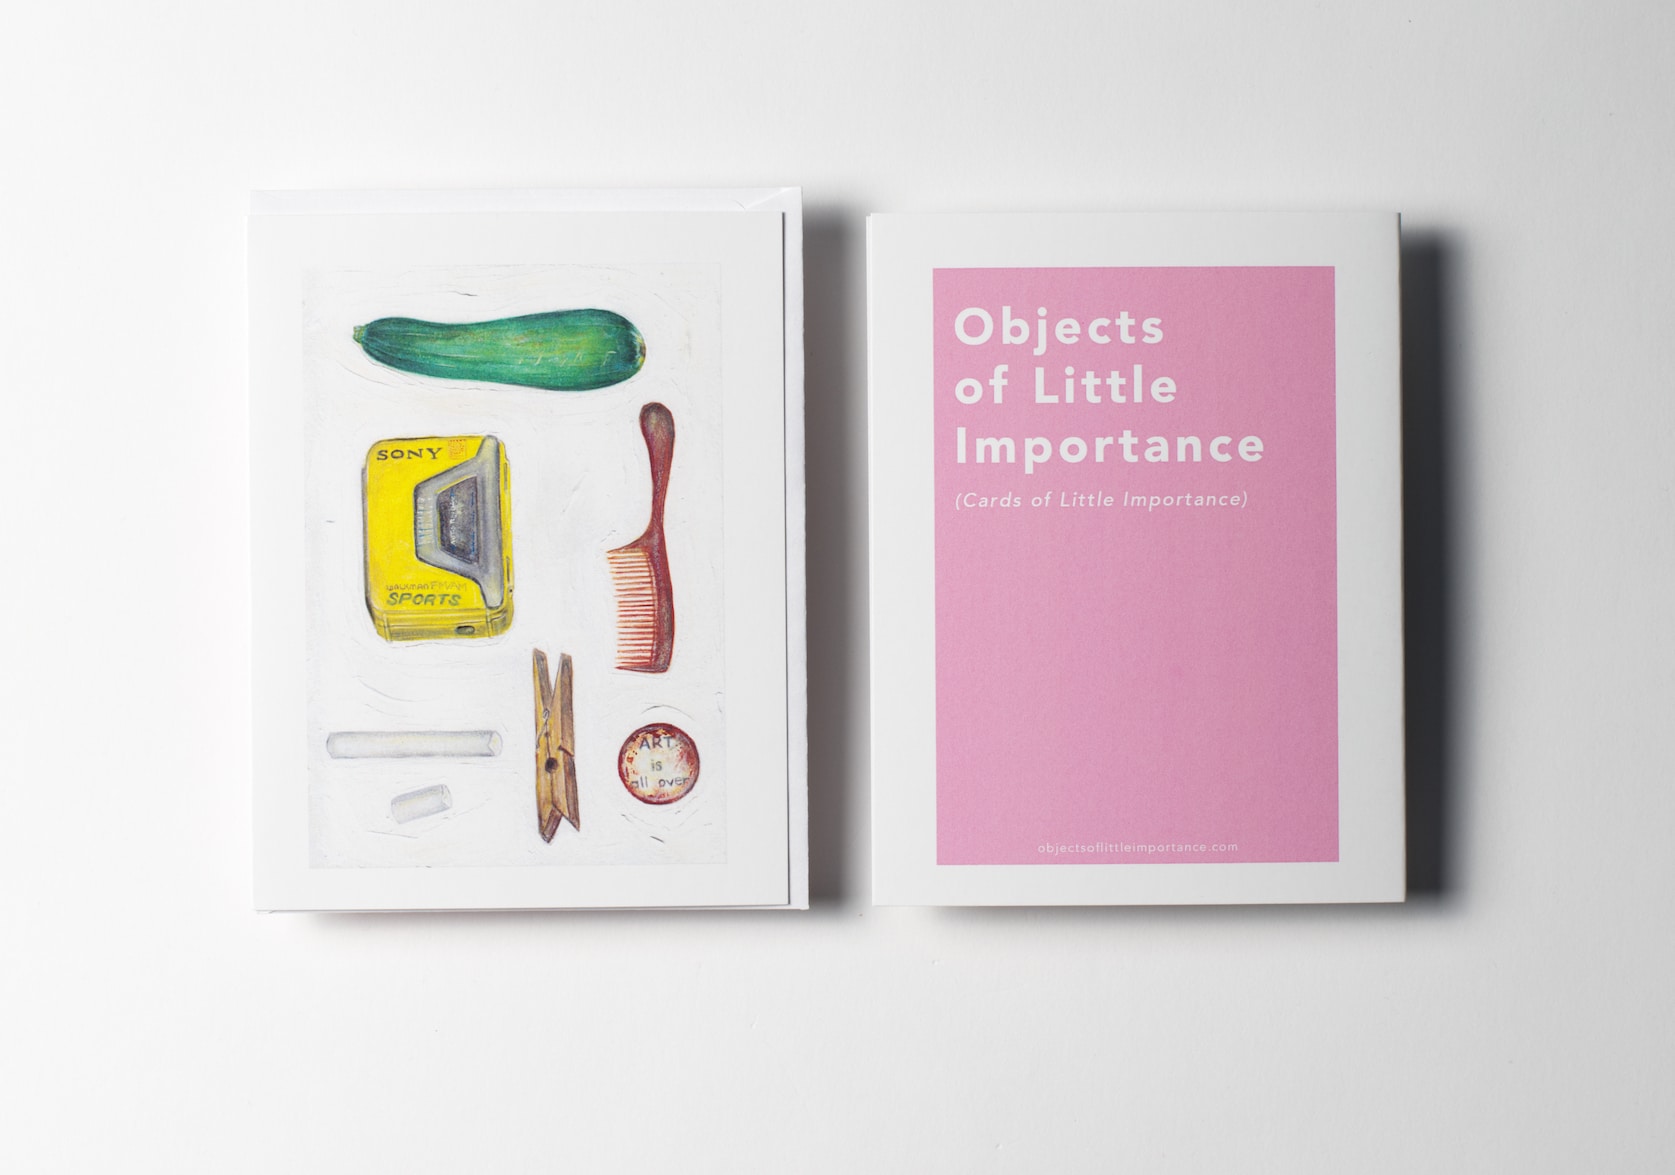 White greeting card featuring paintings of a zucchini, a yellow sony walkman, a brown comb, one and a half white chalk sticks, a clothspin, and a pin with text that reads: Art is all over. Back of the card is a pink rectangle with white text that reads: Objects of Little Importance (Cards of Little Importance).